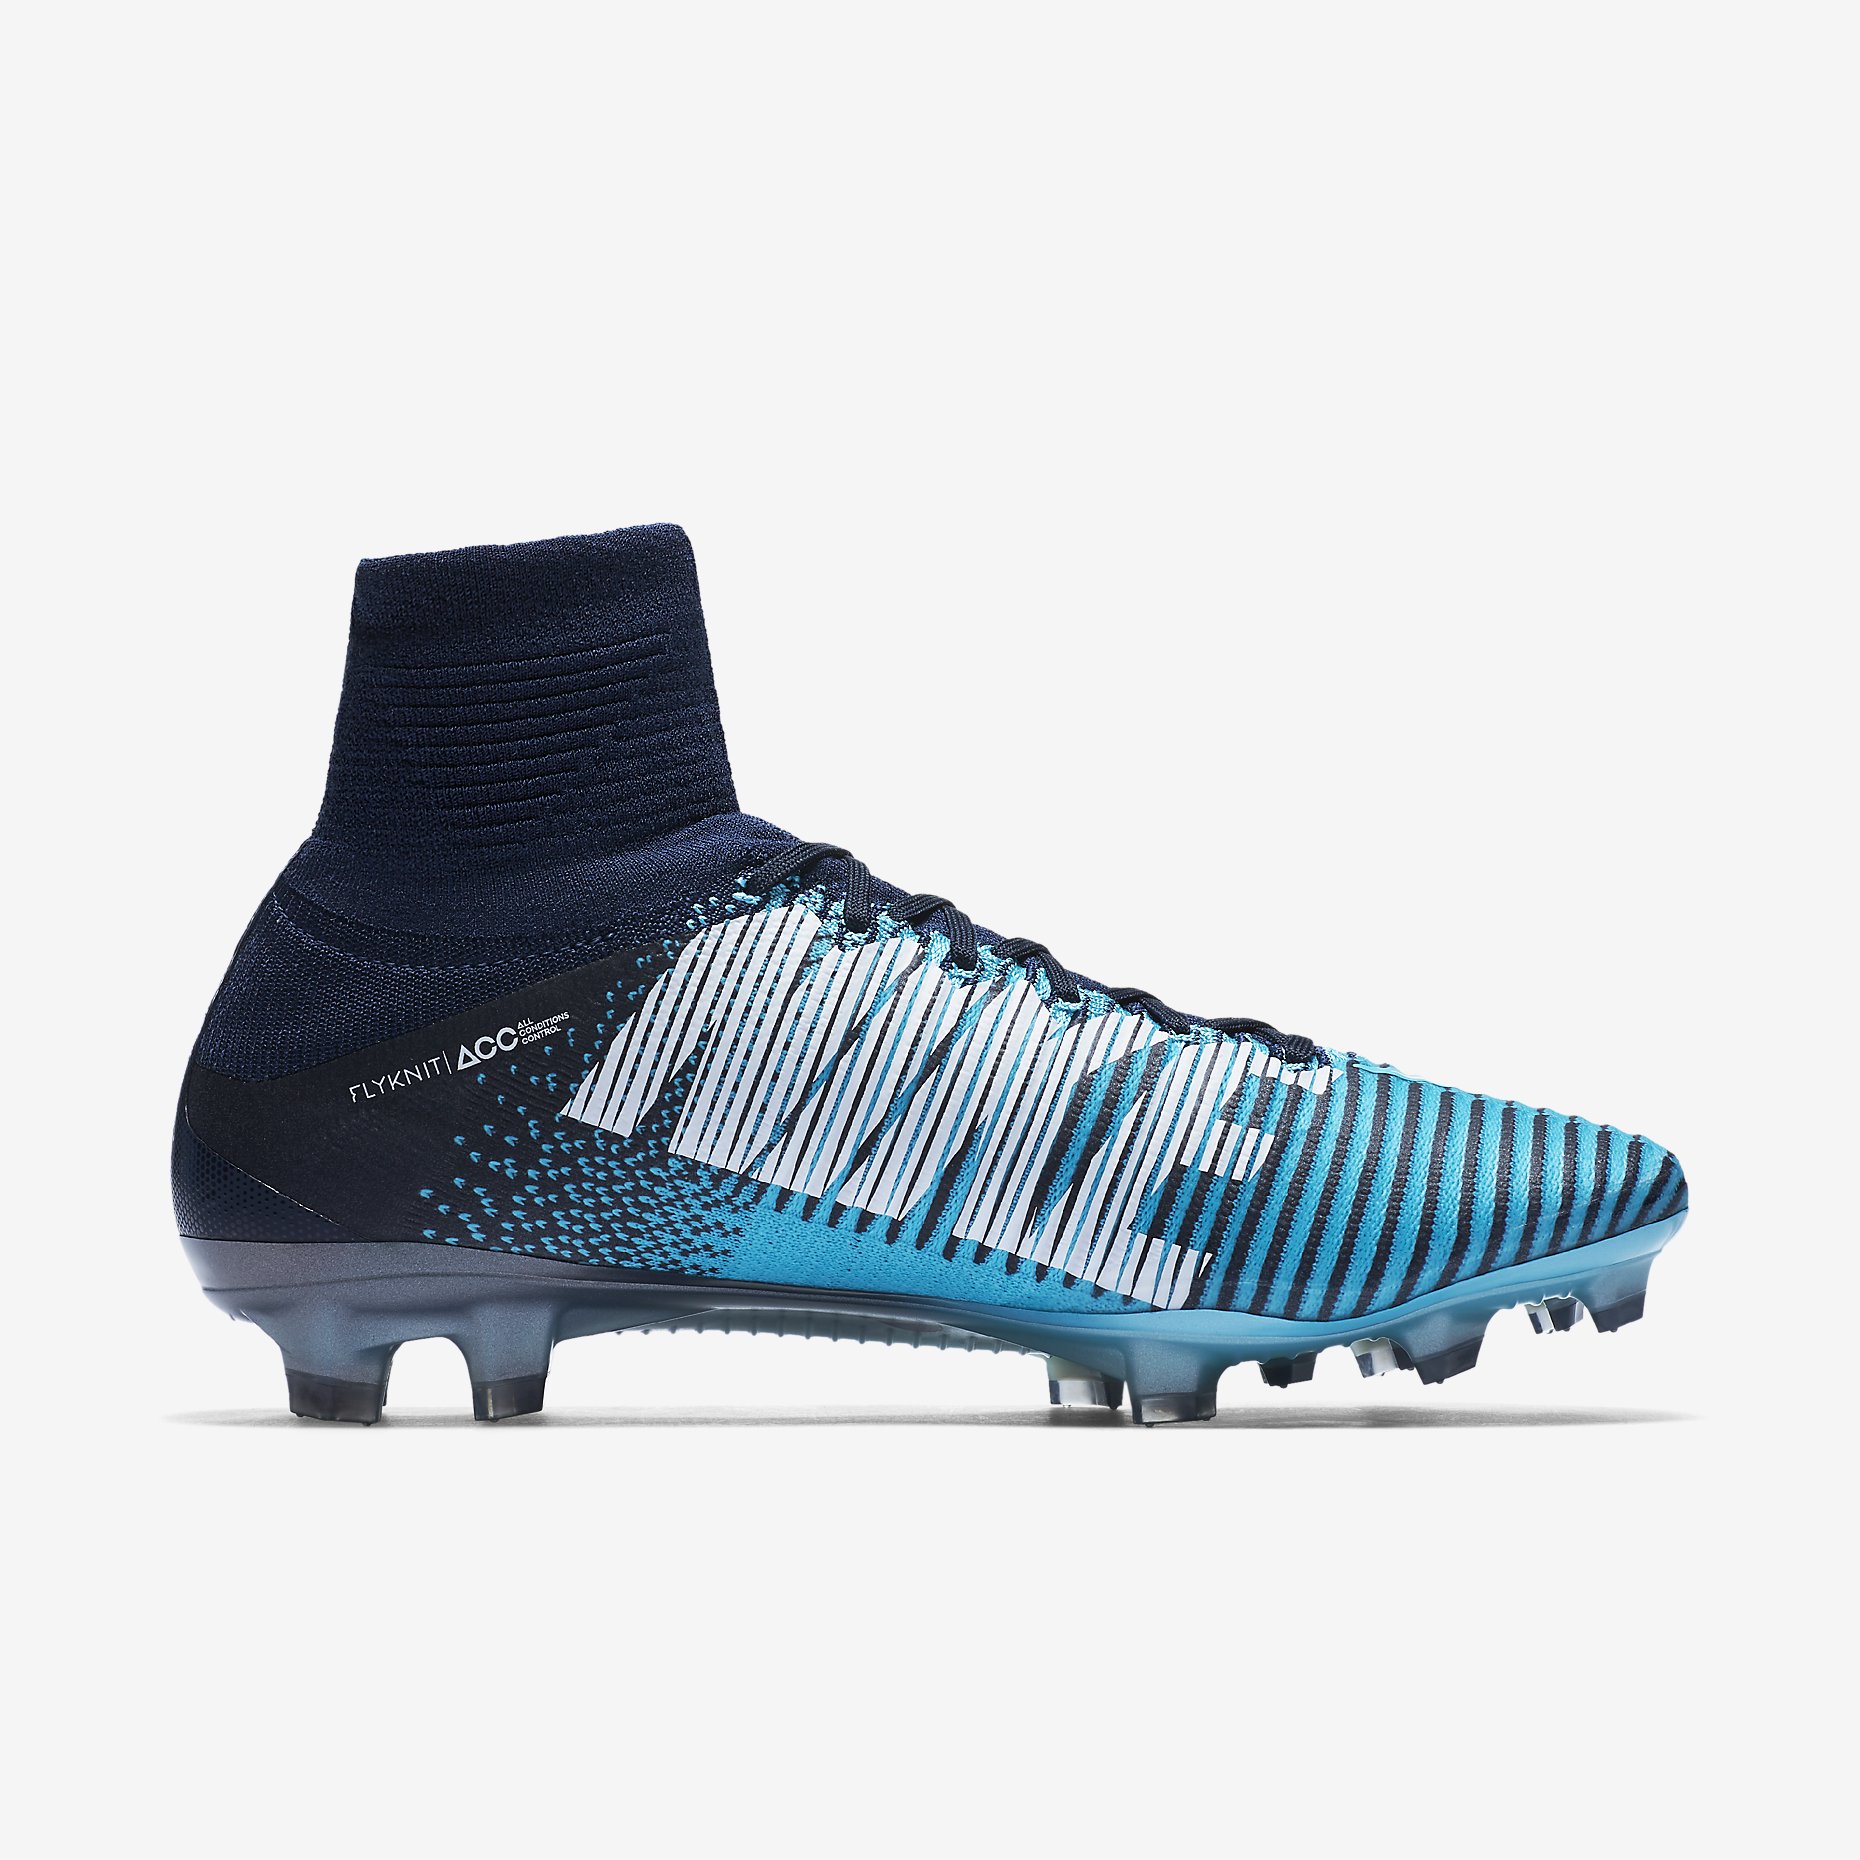 Agente Detectable Chispa  chispear Nike Mercurial Superfly V FG Fire & Ice - Obsidian / Gamma Blue / Glacier  Blue / White - Football Shirt Culture - Latest Football Kit News and More